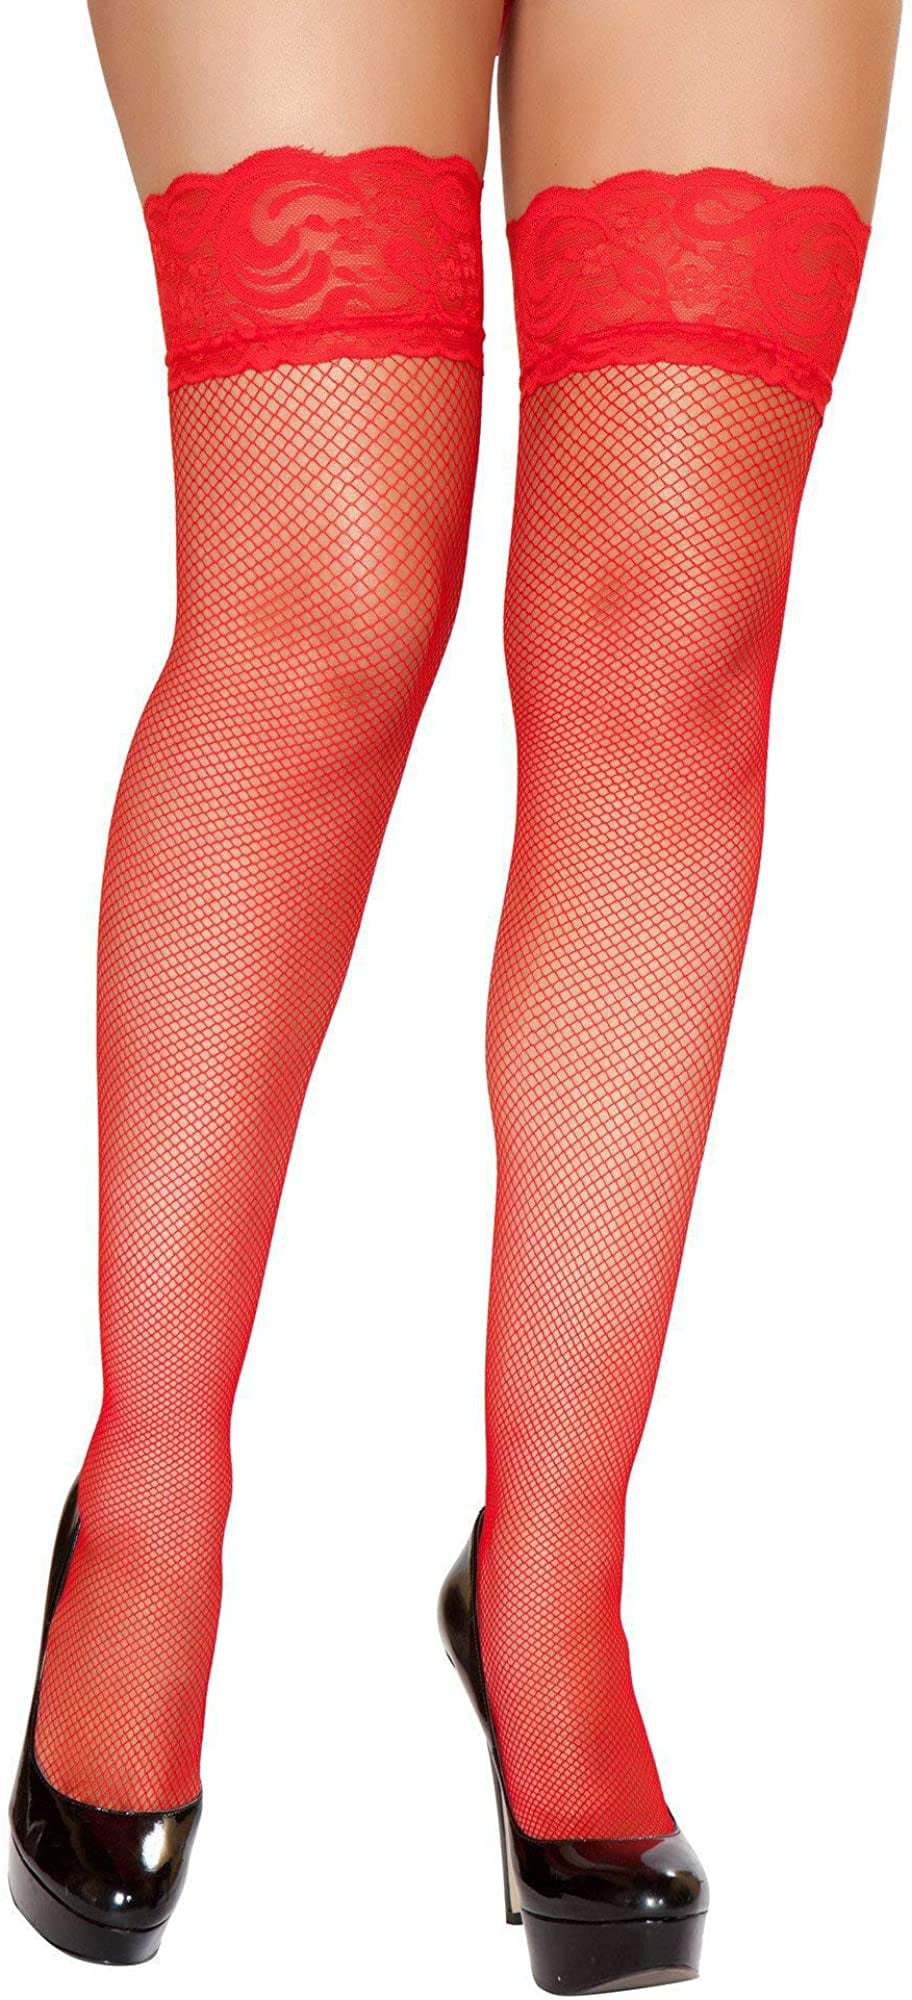 Red Fishnet Stockings with Lace Top Red Thigh Highs ST103 Roma Fishnet Stocking 